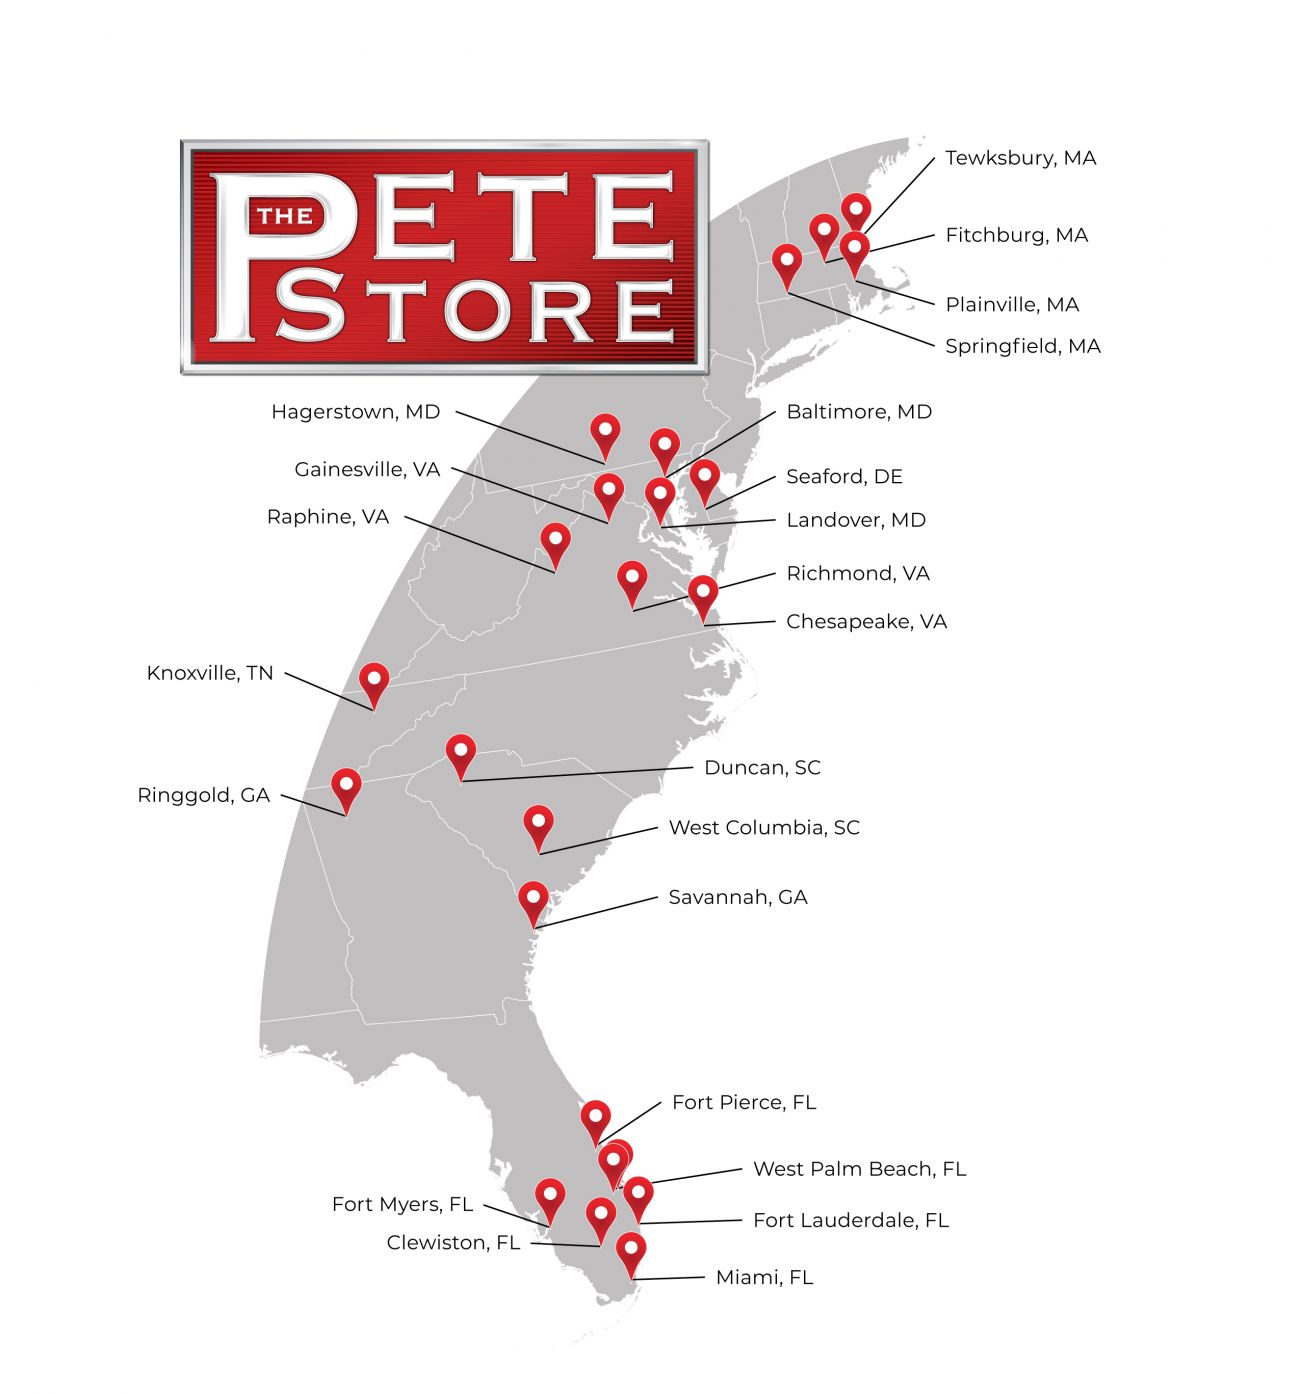 THE PETE STORE ENTERS FLORIDA WITH ACQUISITION OF PALM PETERBILT TRUCK CENTERS